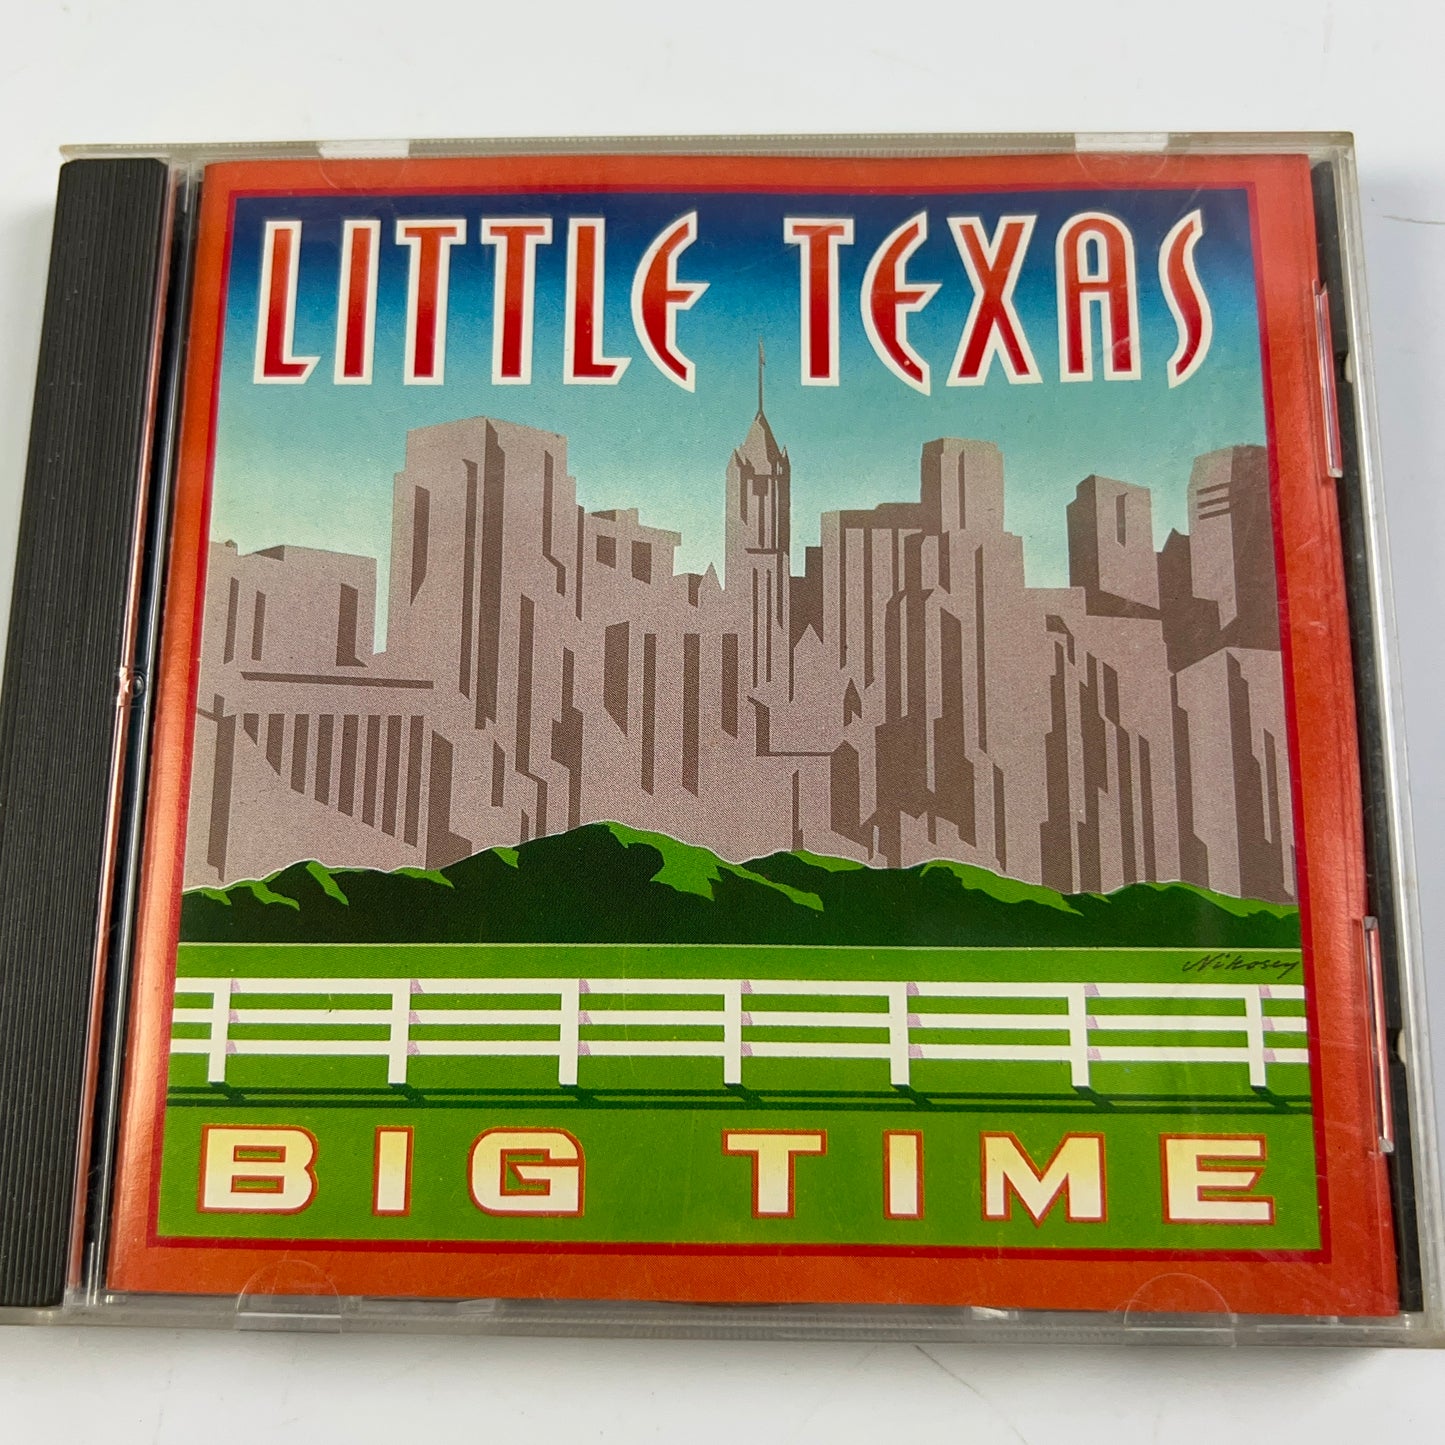 Big Time by Little Texas (CD, May-1993, Warner Bros.)